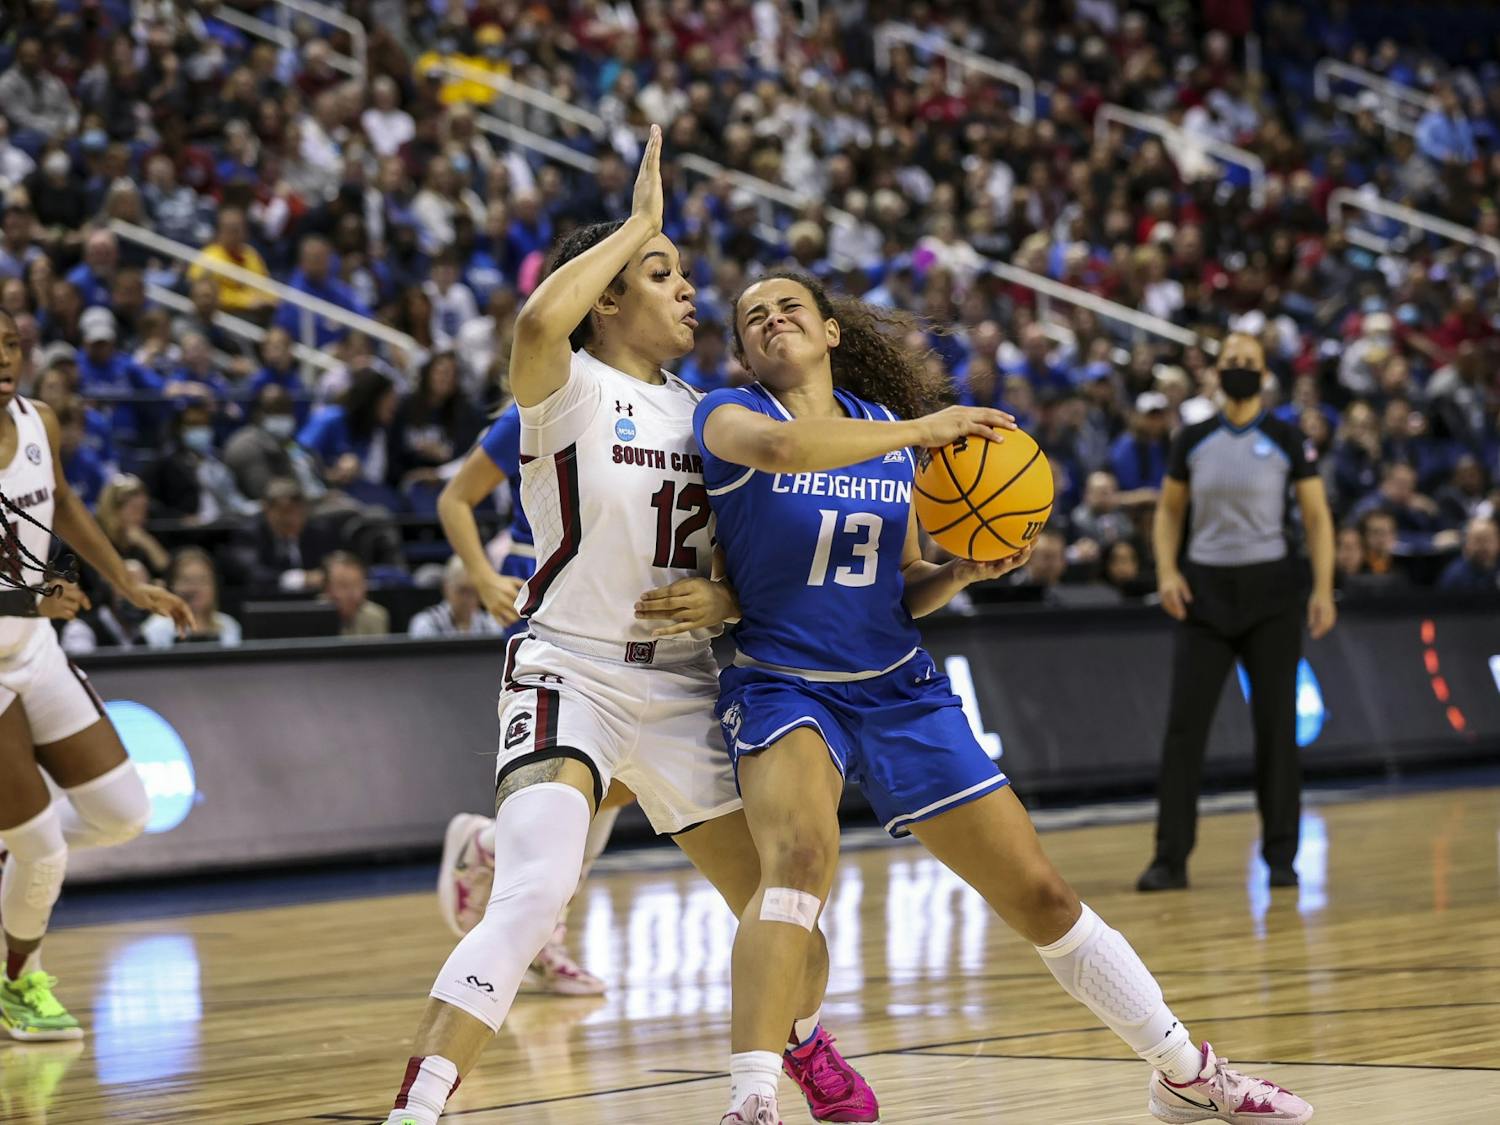 Junior guard Brea Beal defending during the first quarter of South Carolina's 80-50 victory over Creighton during the Elite Eight on Sunday, March 27, 2022.